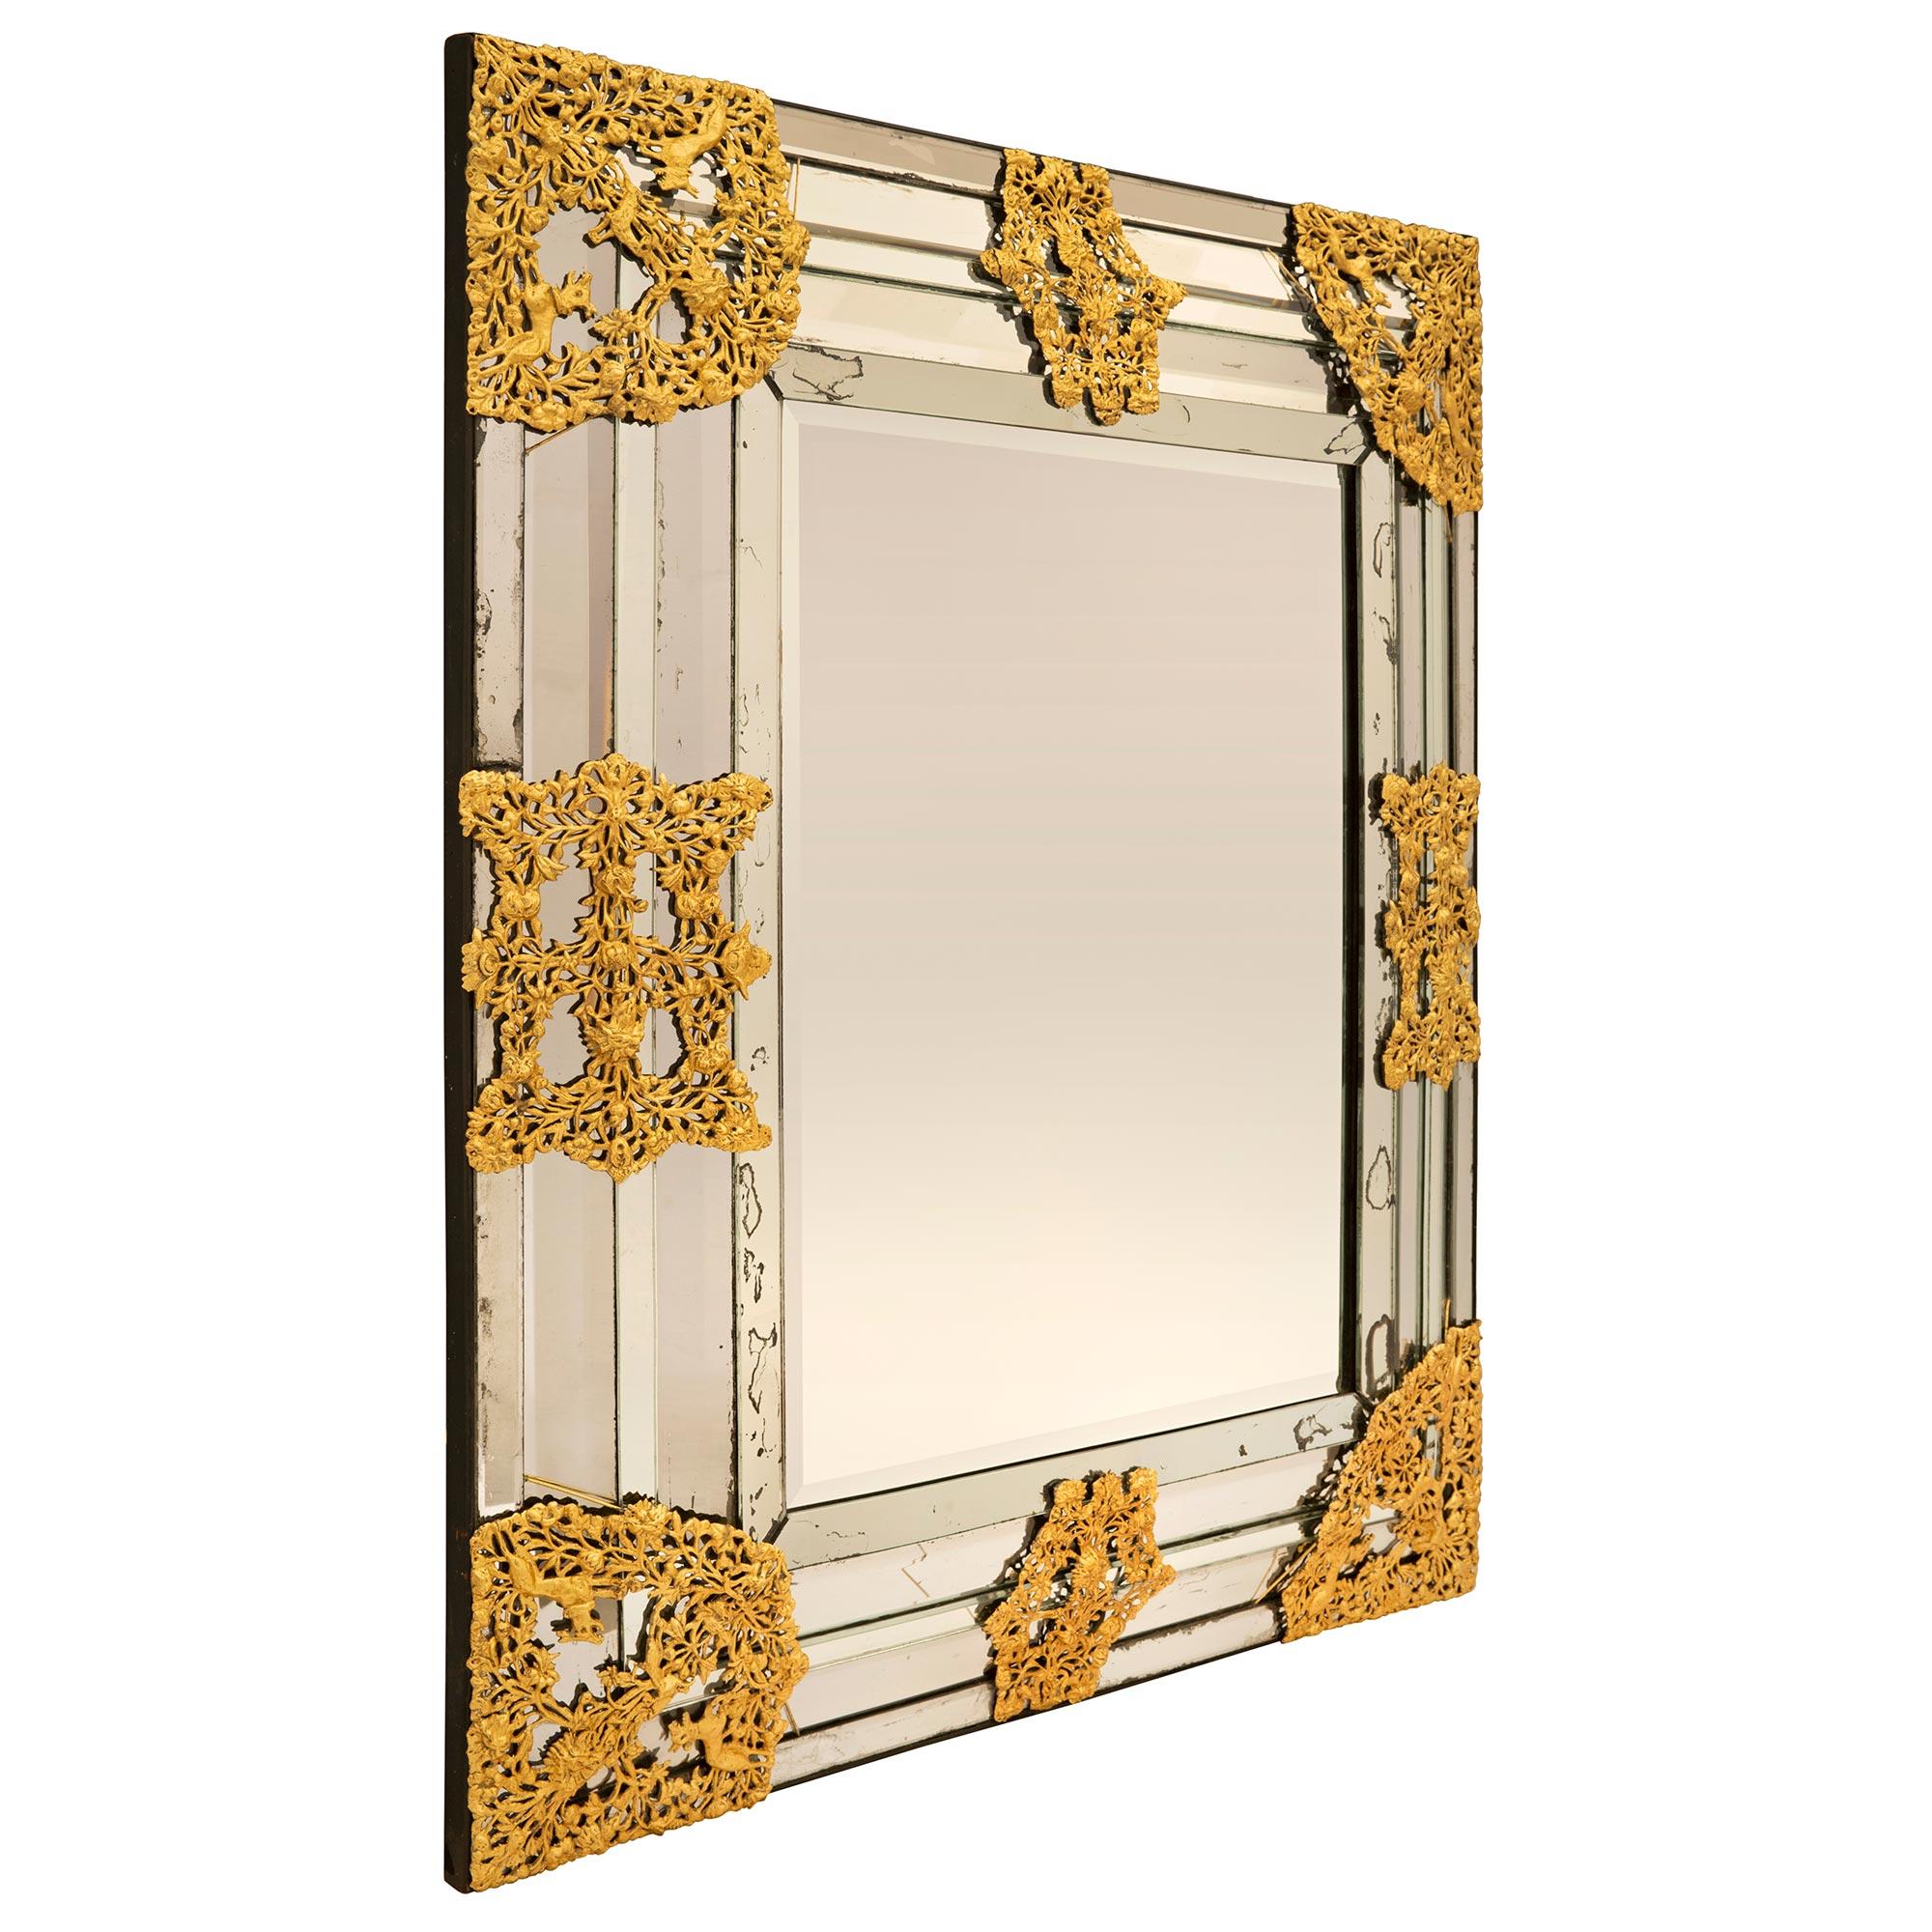 A stunning and extremely decorative Dutch 19th century gilt metal mirror. The exceptional and very unique mirror retains all of its original mirror plates throughout. The mirror plates along the sides are set at different angles creating a beautiful